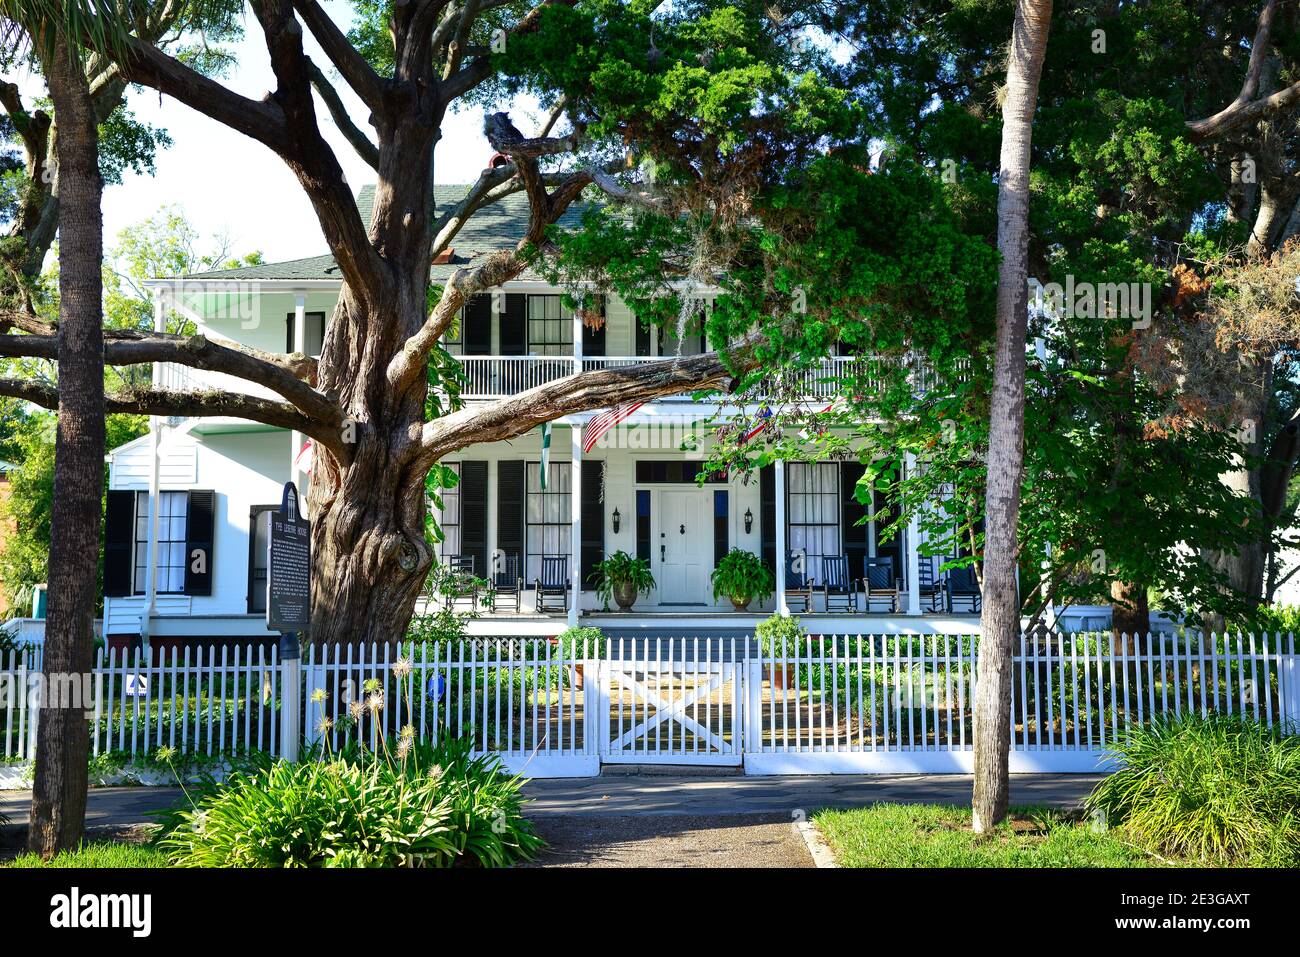 The beautiful, historic Greek Revival style 'Lesesne House' with porch and rocking chairs in Fernandina Beach, FL on Amelia Island Stock Photo